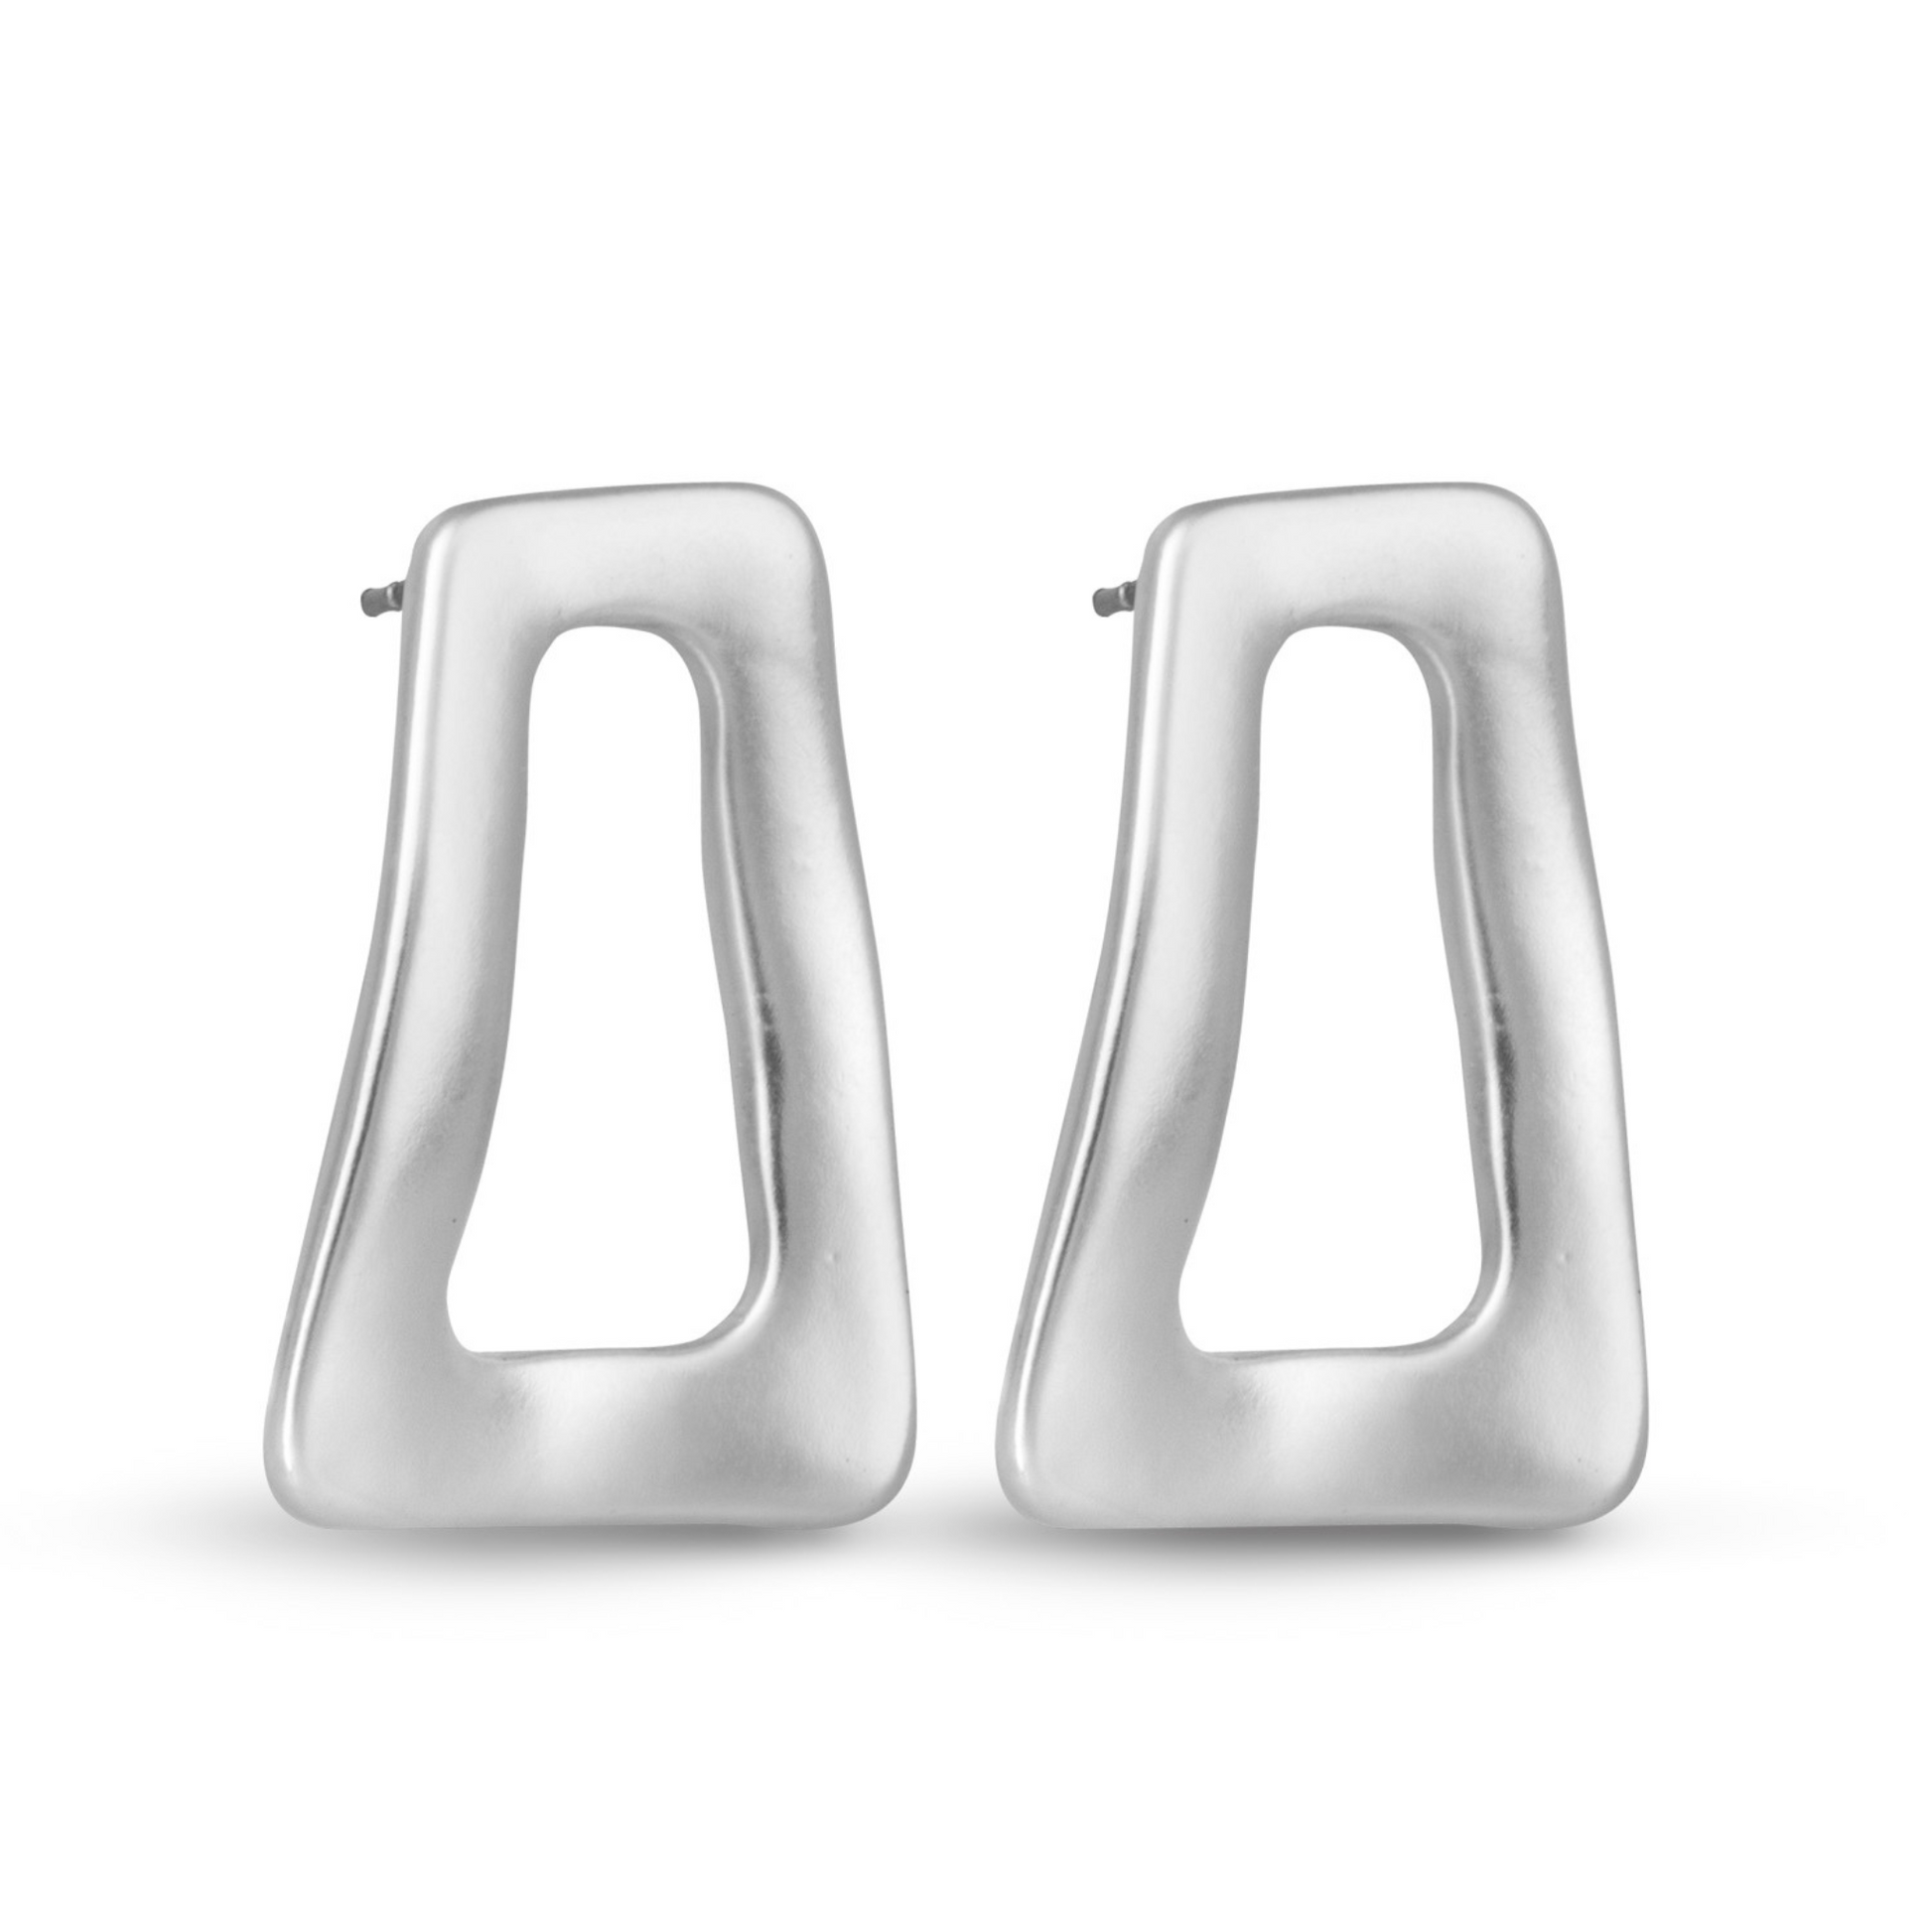 Add a modern touch to your accessory collection with Tina Open Trapezoid Studs. These sleek silver stud earrings feature a unique abstract design that is sure to make a statement. Crafted from quality materials, these earrings are perfect for adding a touch of style to any outfit.